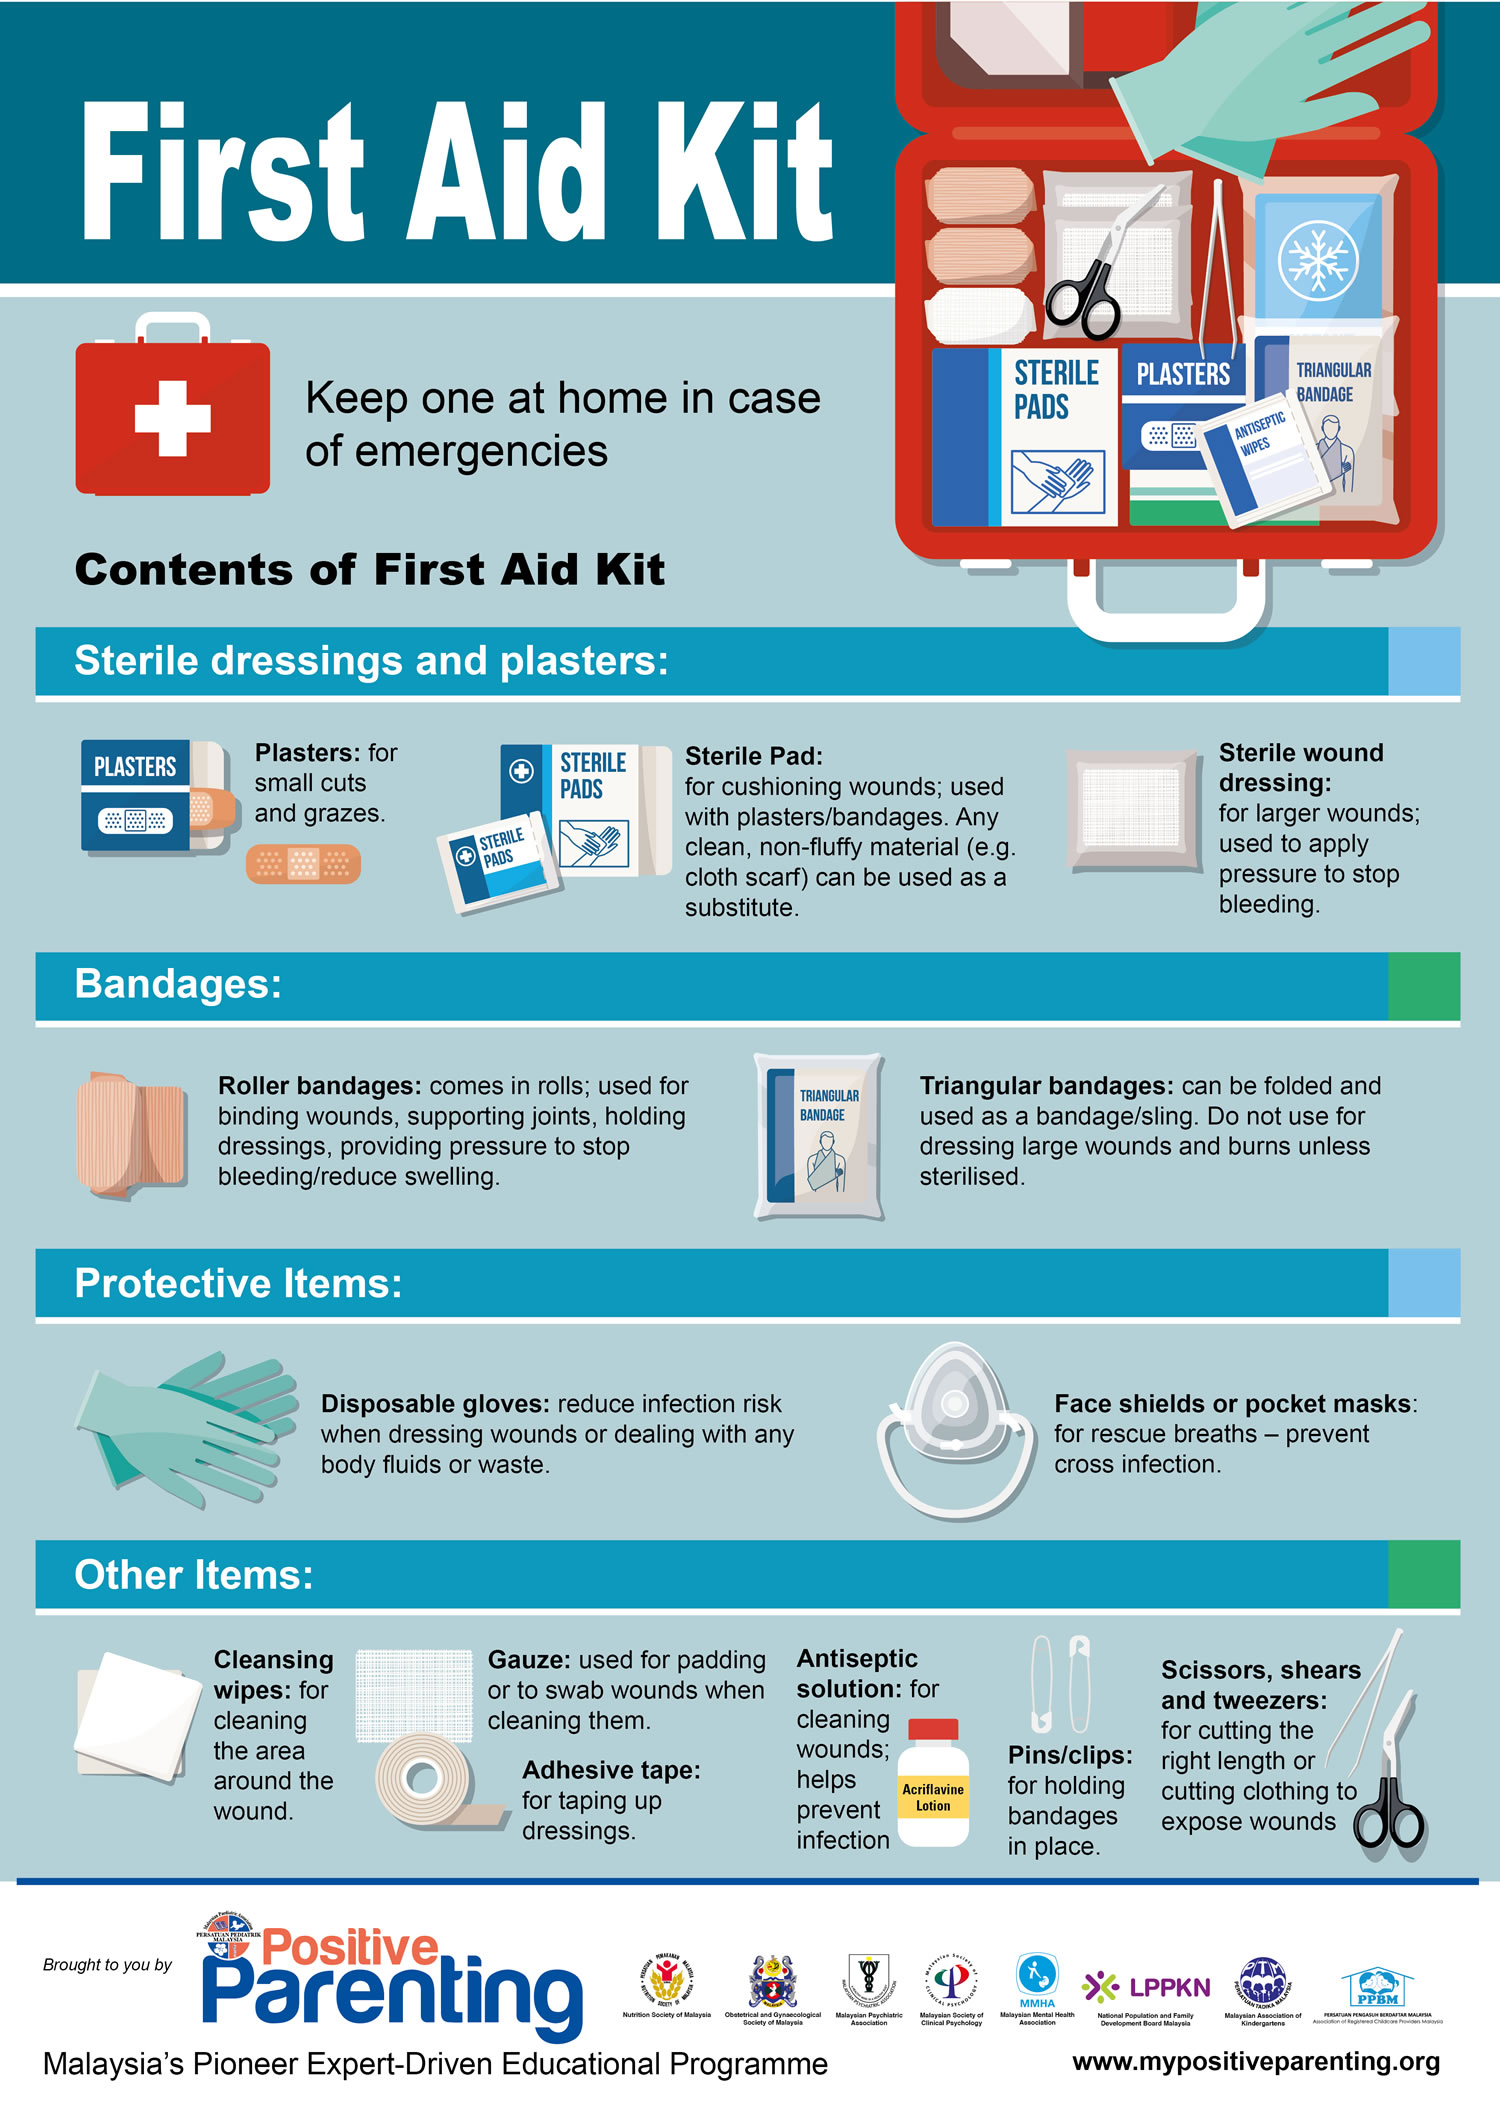 Emergency Kit Items And Their Uses Drbeckmann